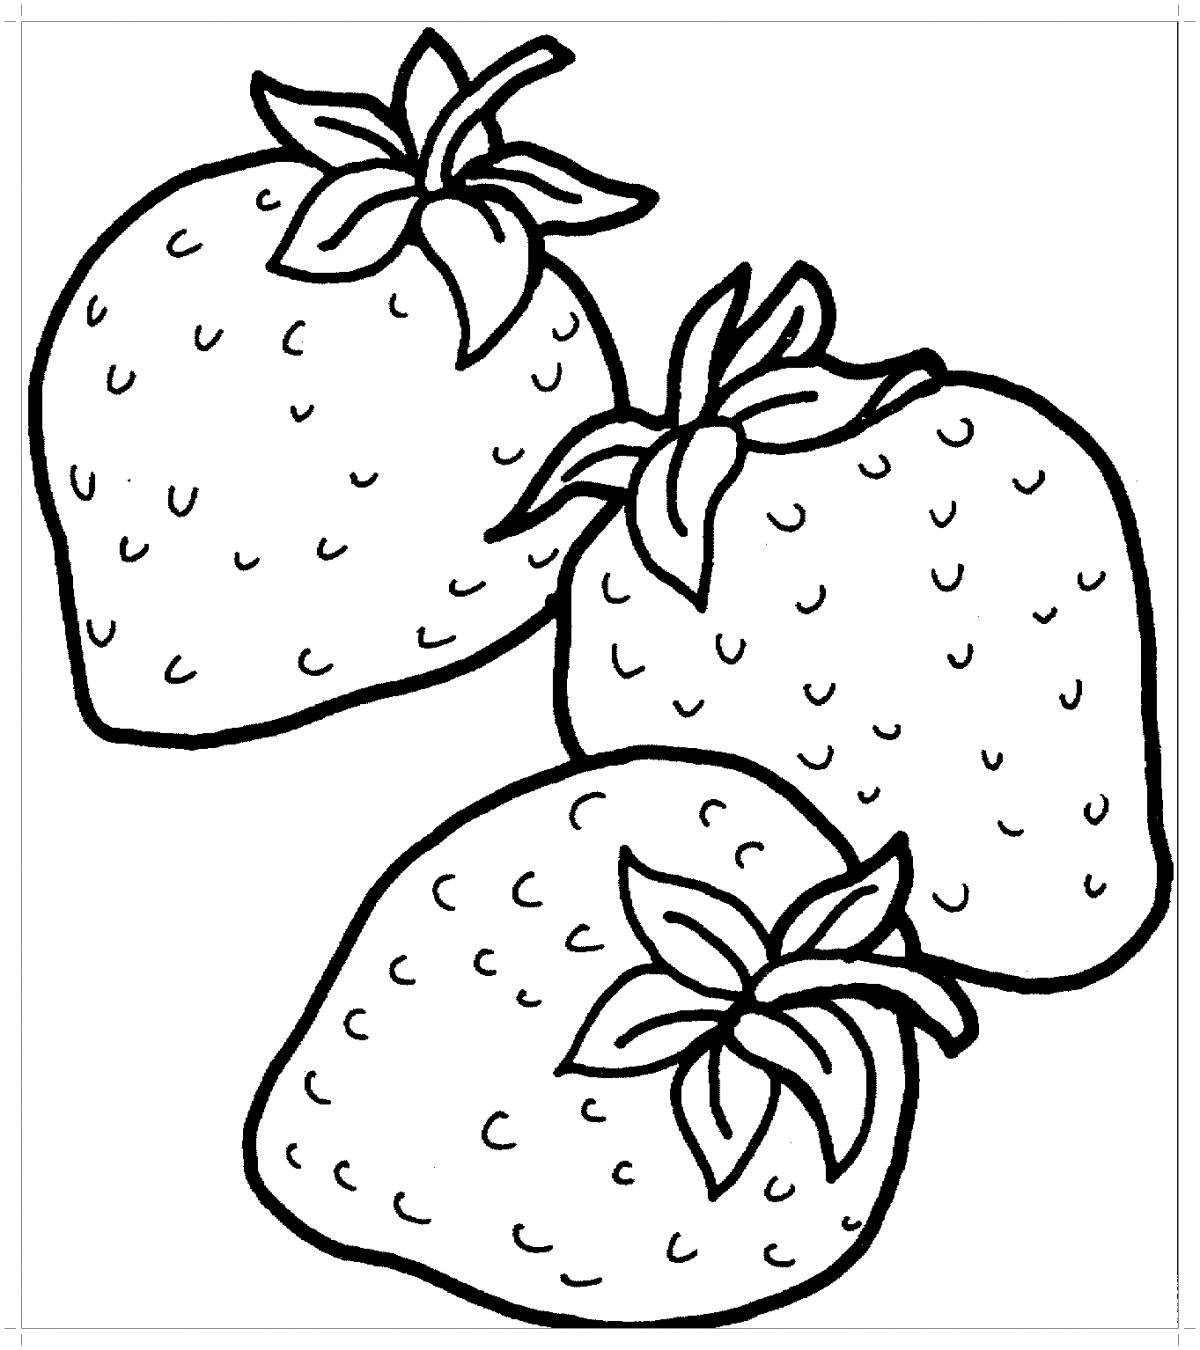 Playful strawberry coloring book for 5-6 year olds